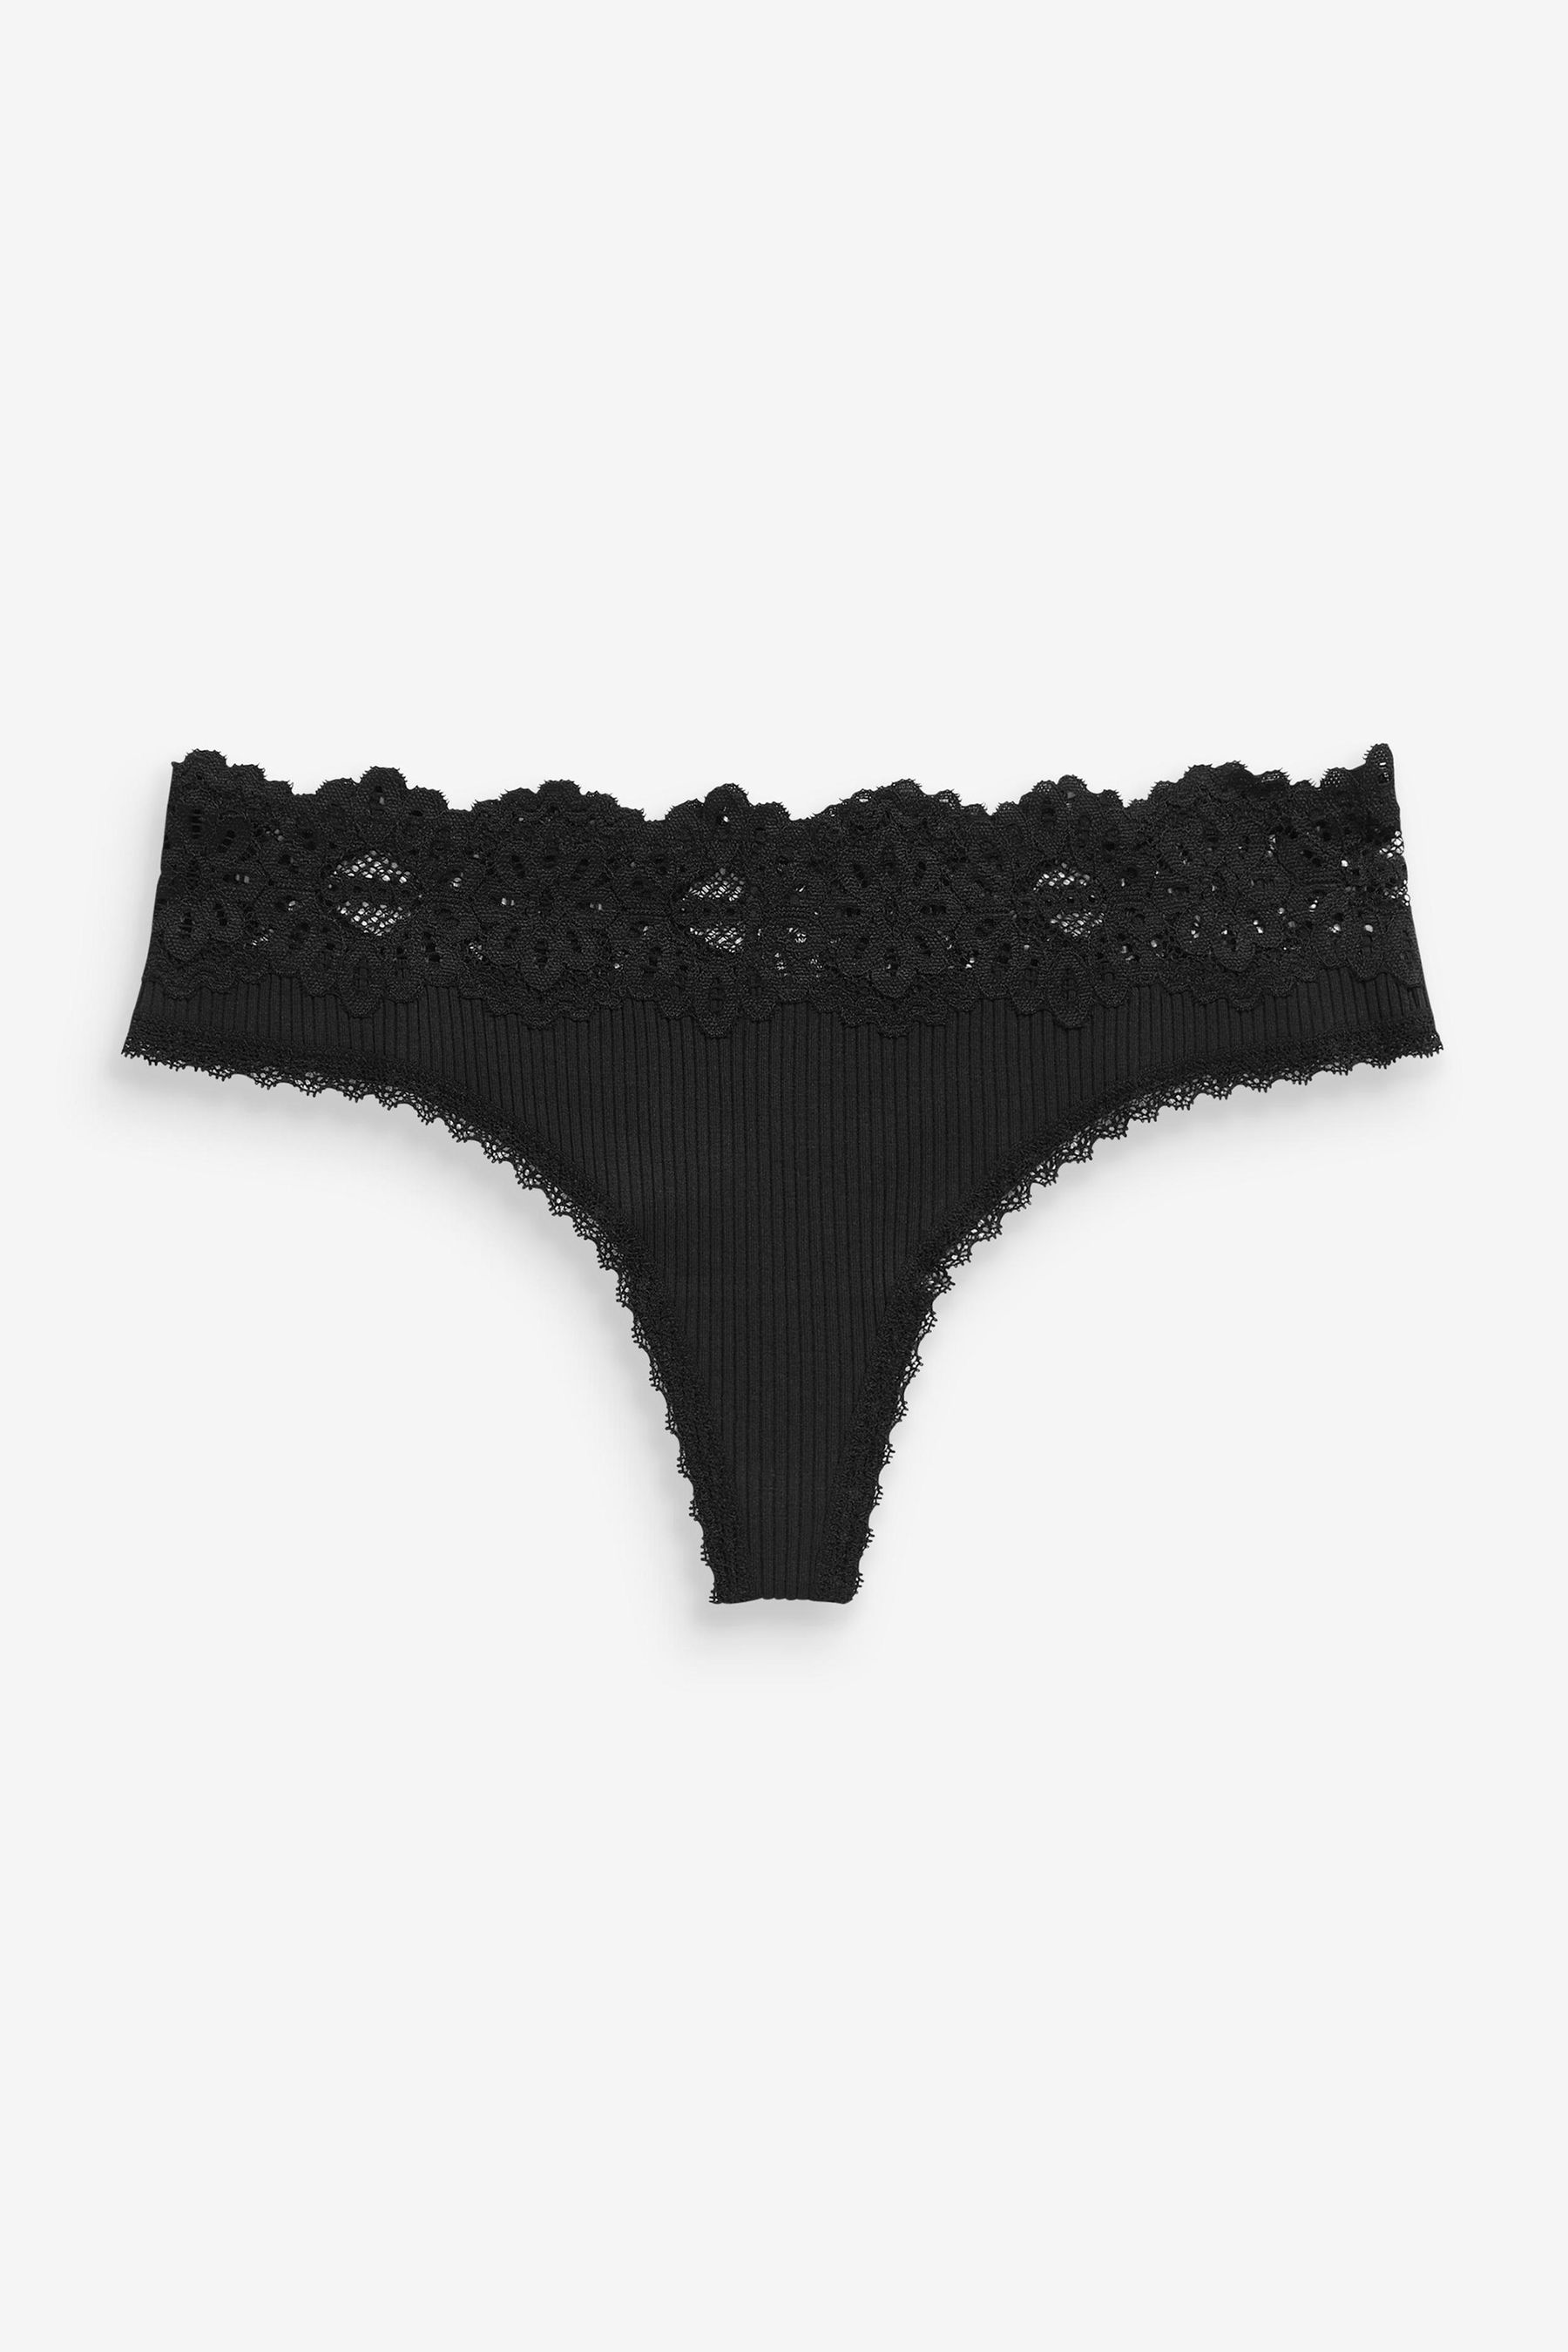 Lace Rib Knickers 3 Pack Thong